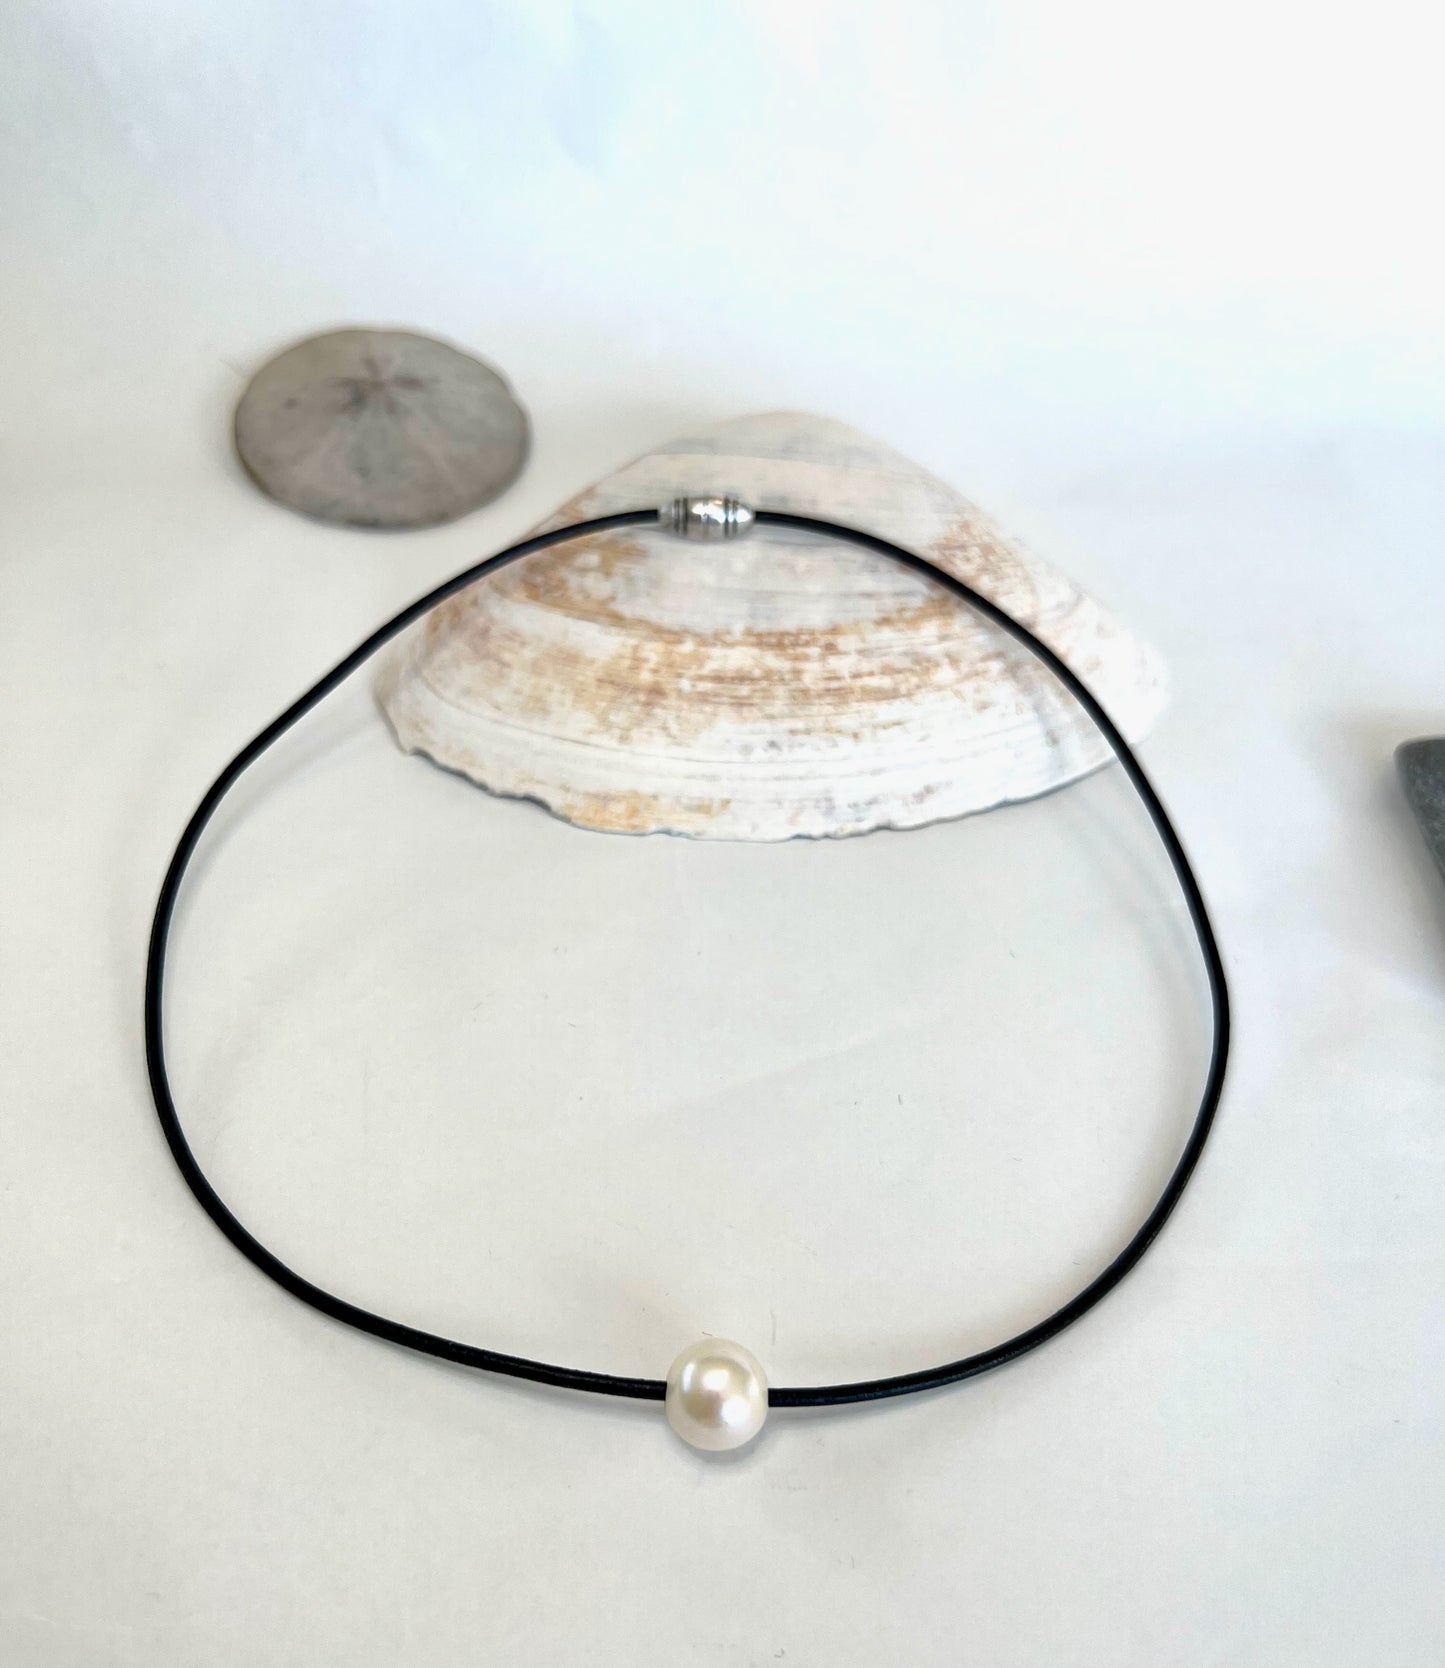 Leather Necklace. Elegant single smooth white pearl slides freely on this soft black Italian leather cord. Finished with a silver magnetic clasp.